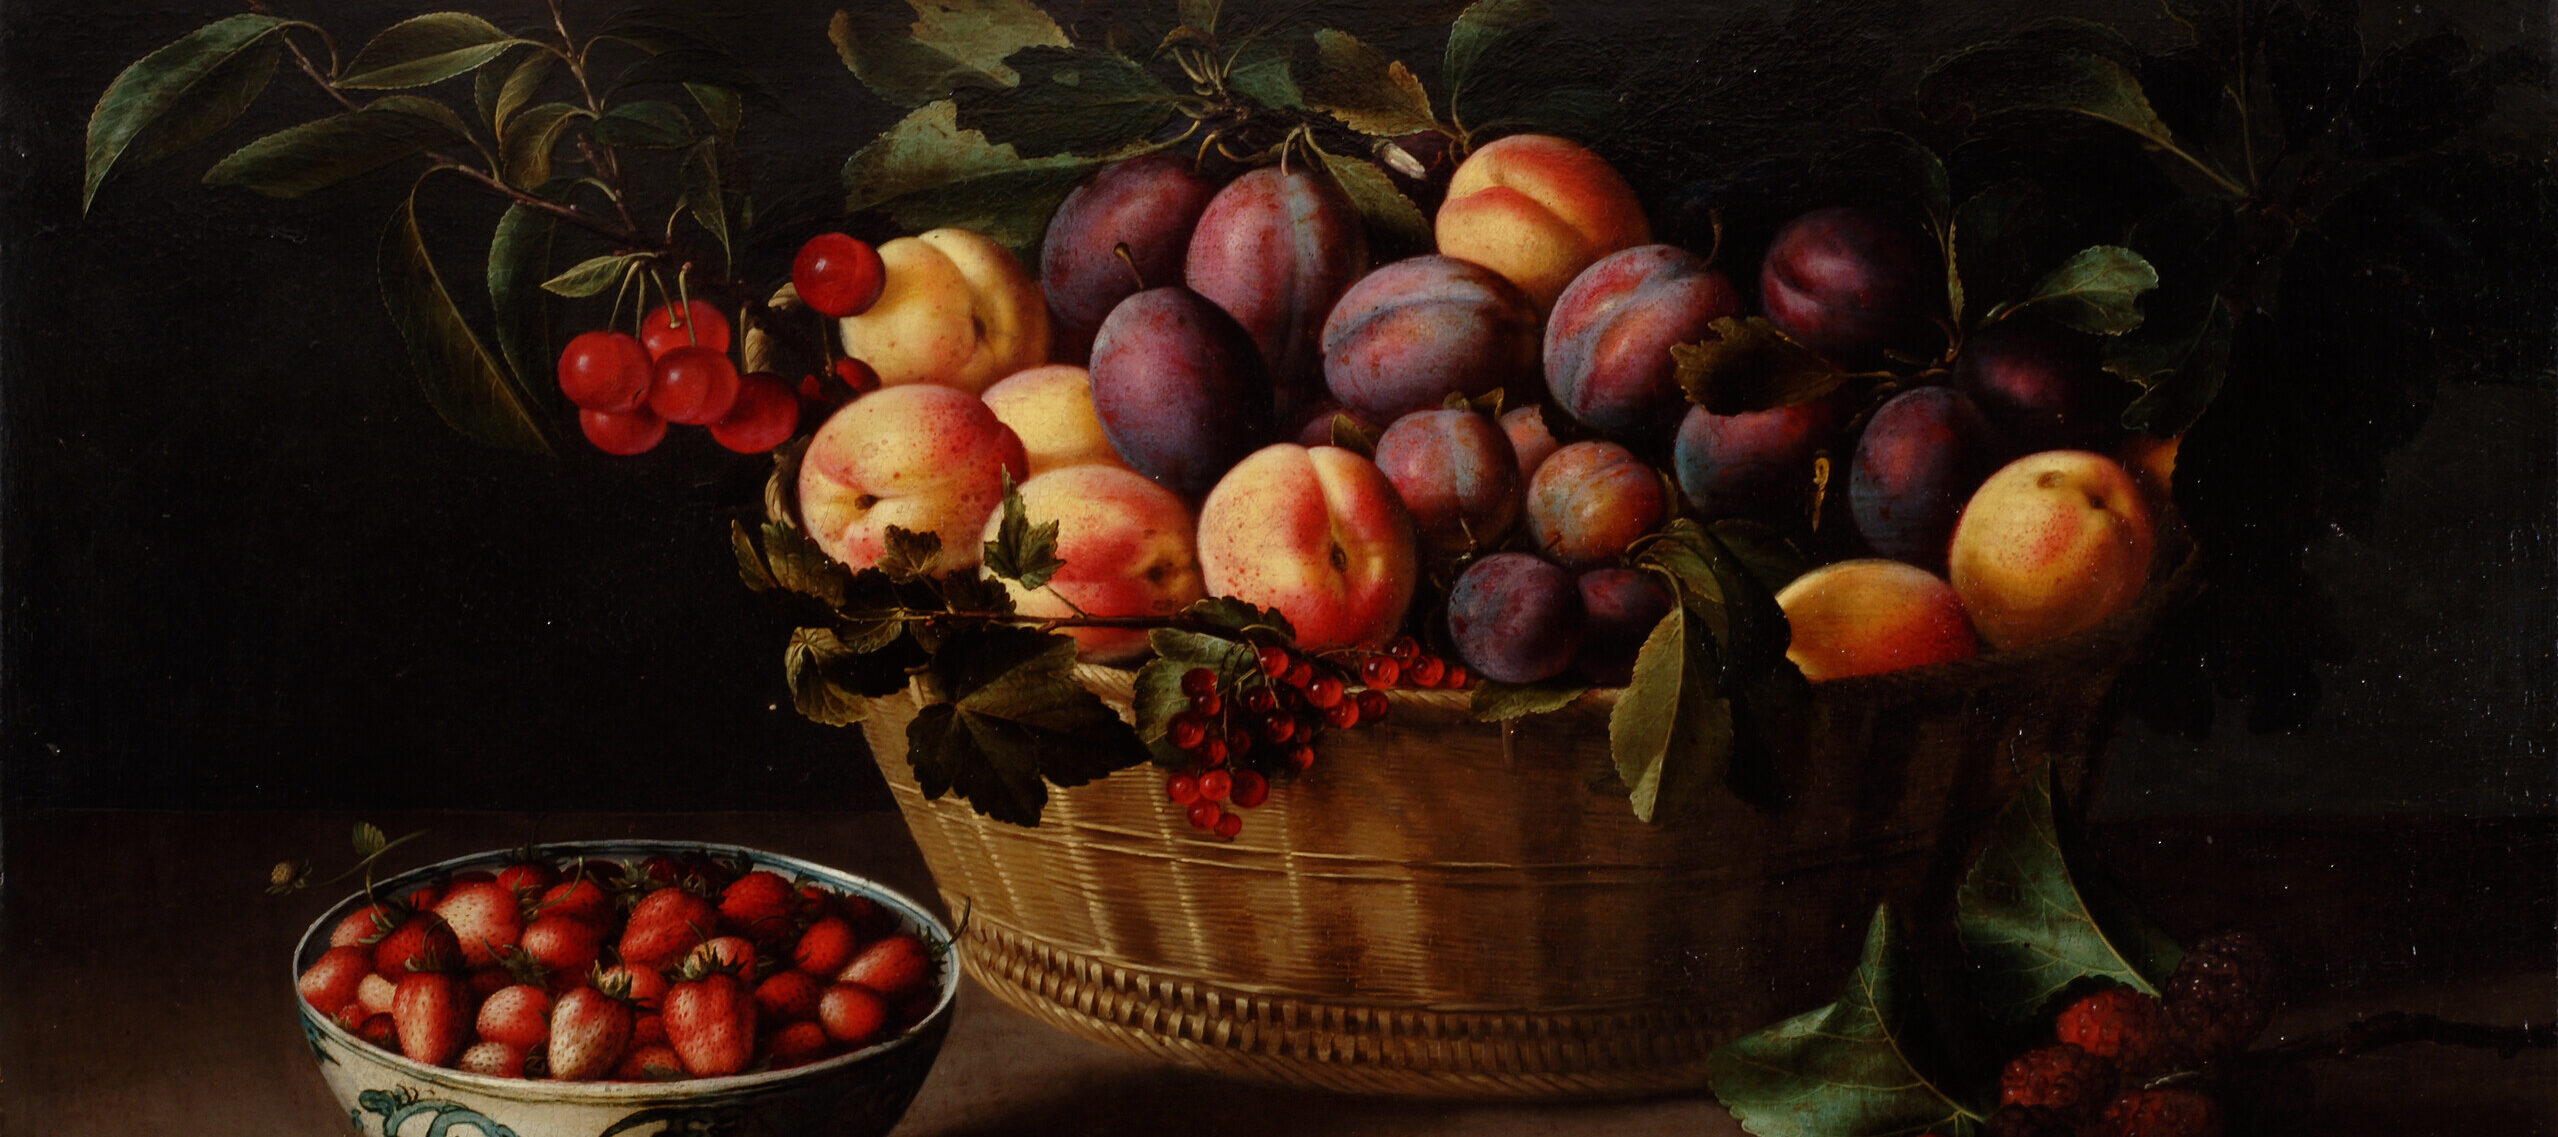 A brightly lit basket of peaches and plums on a ledge against a dark background. To the left of the basket is a blue and white porcelain bowl filled with strawberries. A whole fig sits next to it. In front of the basket is half of a fig and to the right a branch with leaves and red berries.